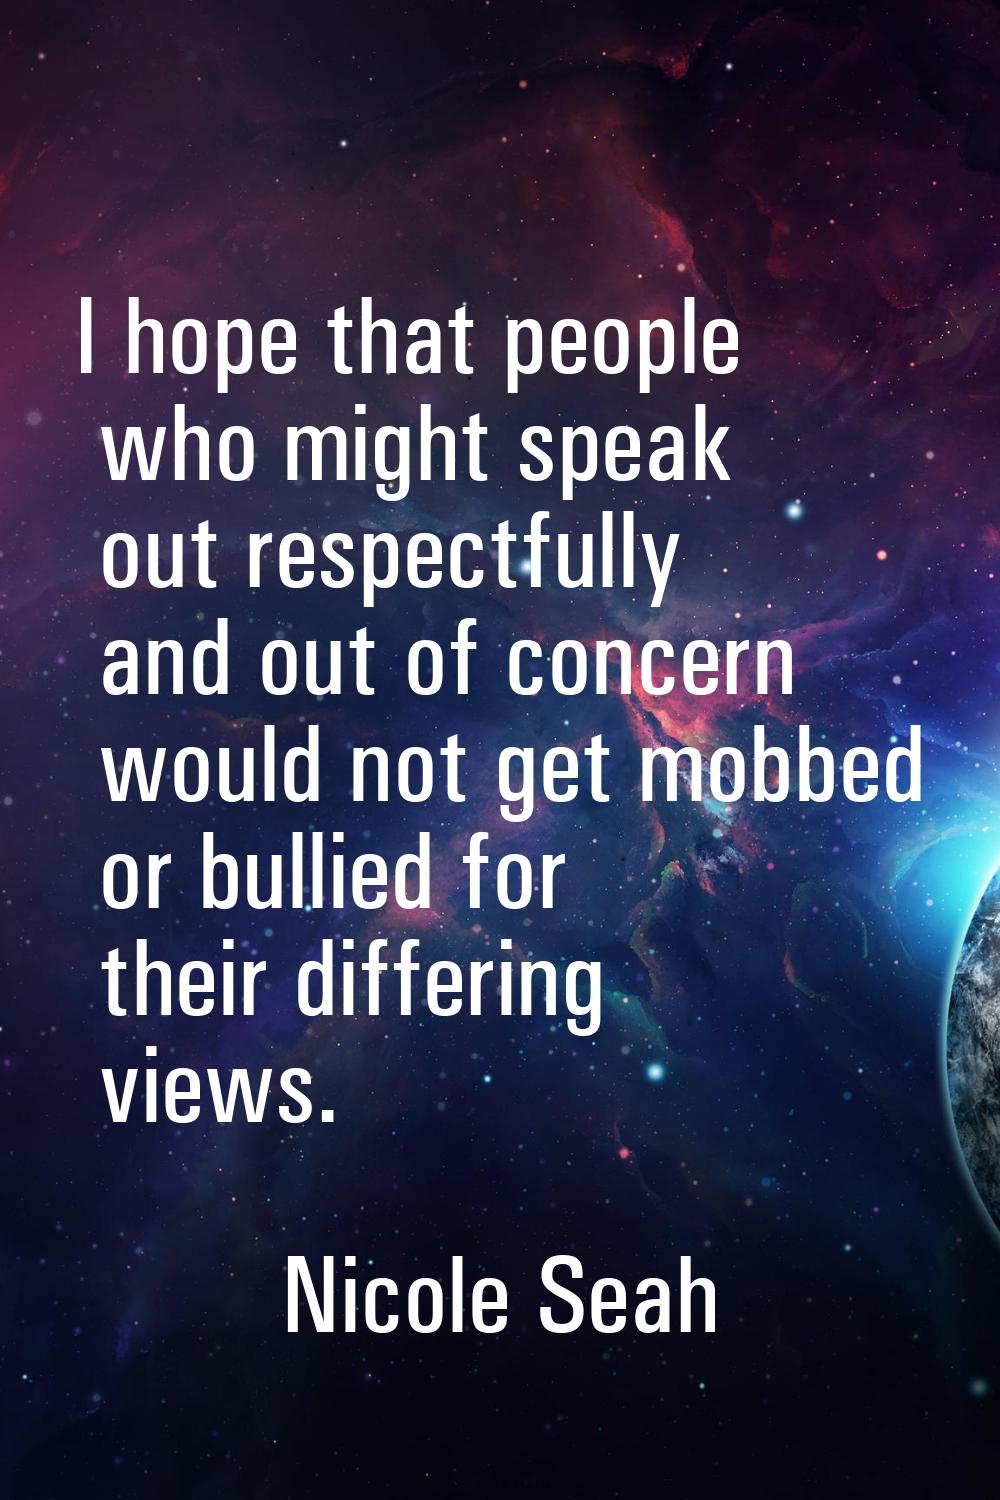 I hope that people who might speak out respectfully and out of concern would not get mobbed or bull